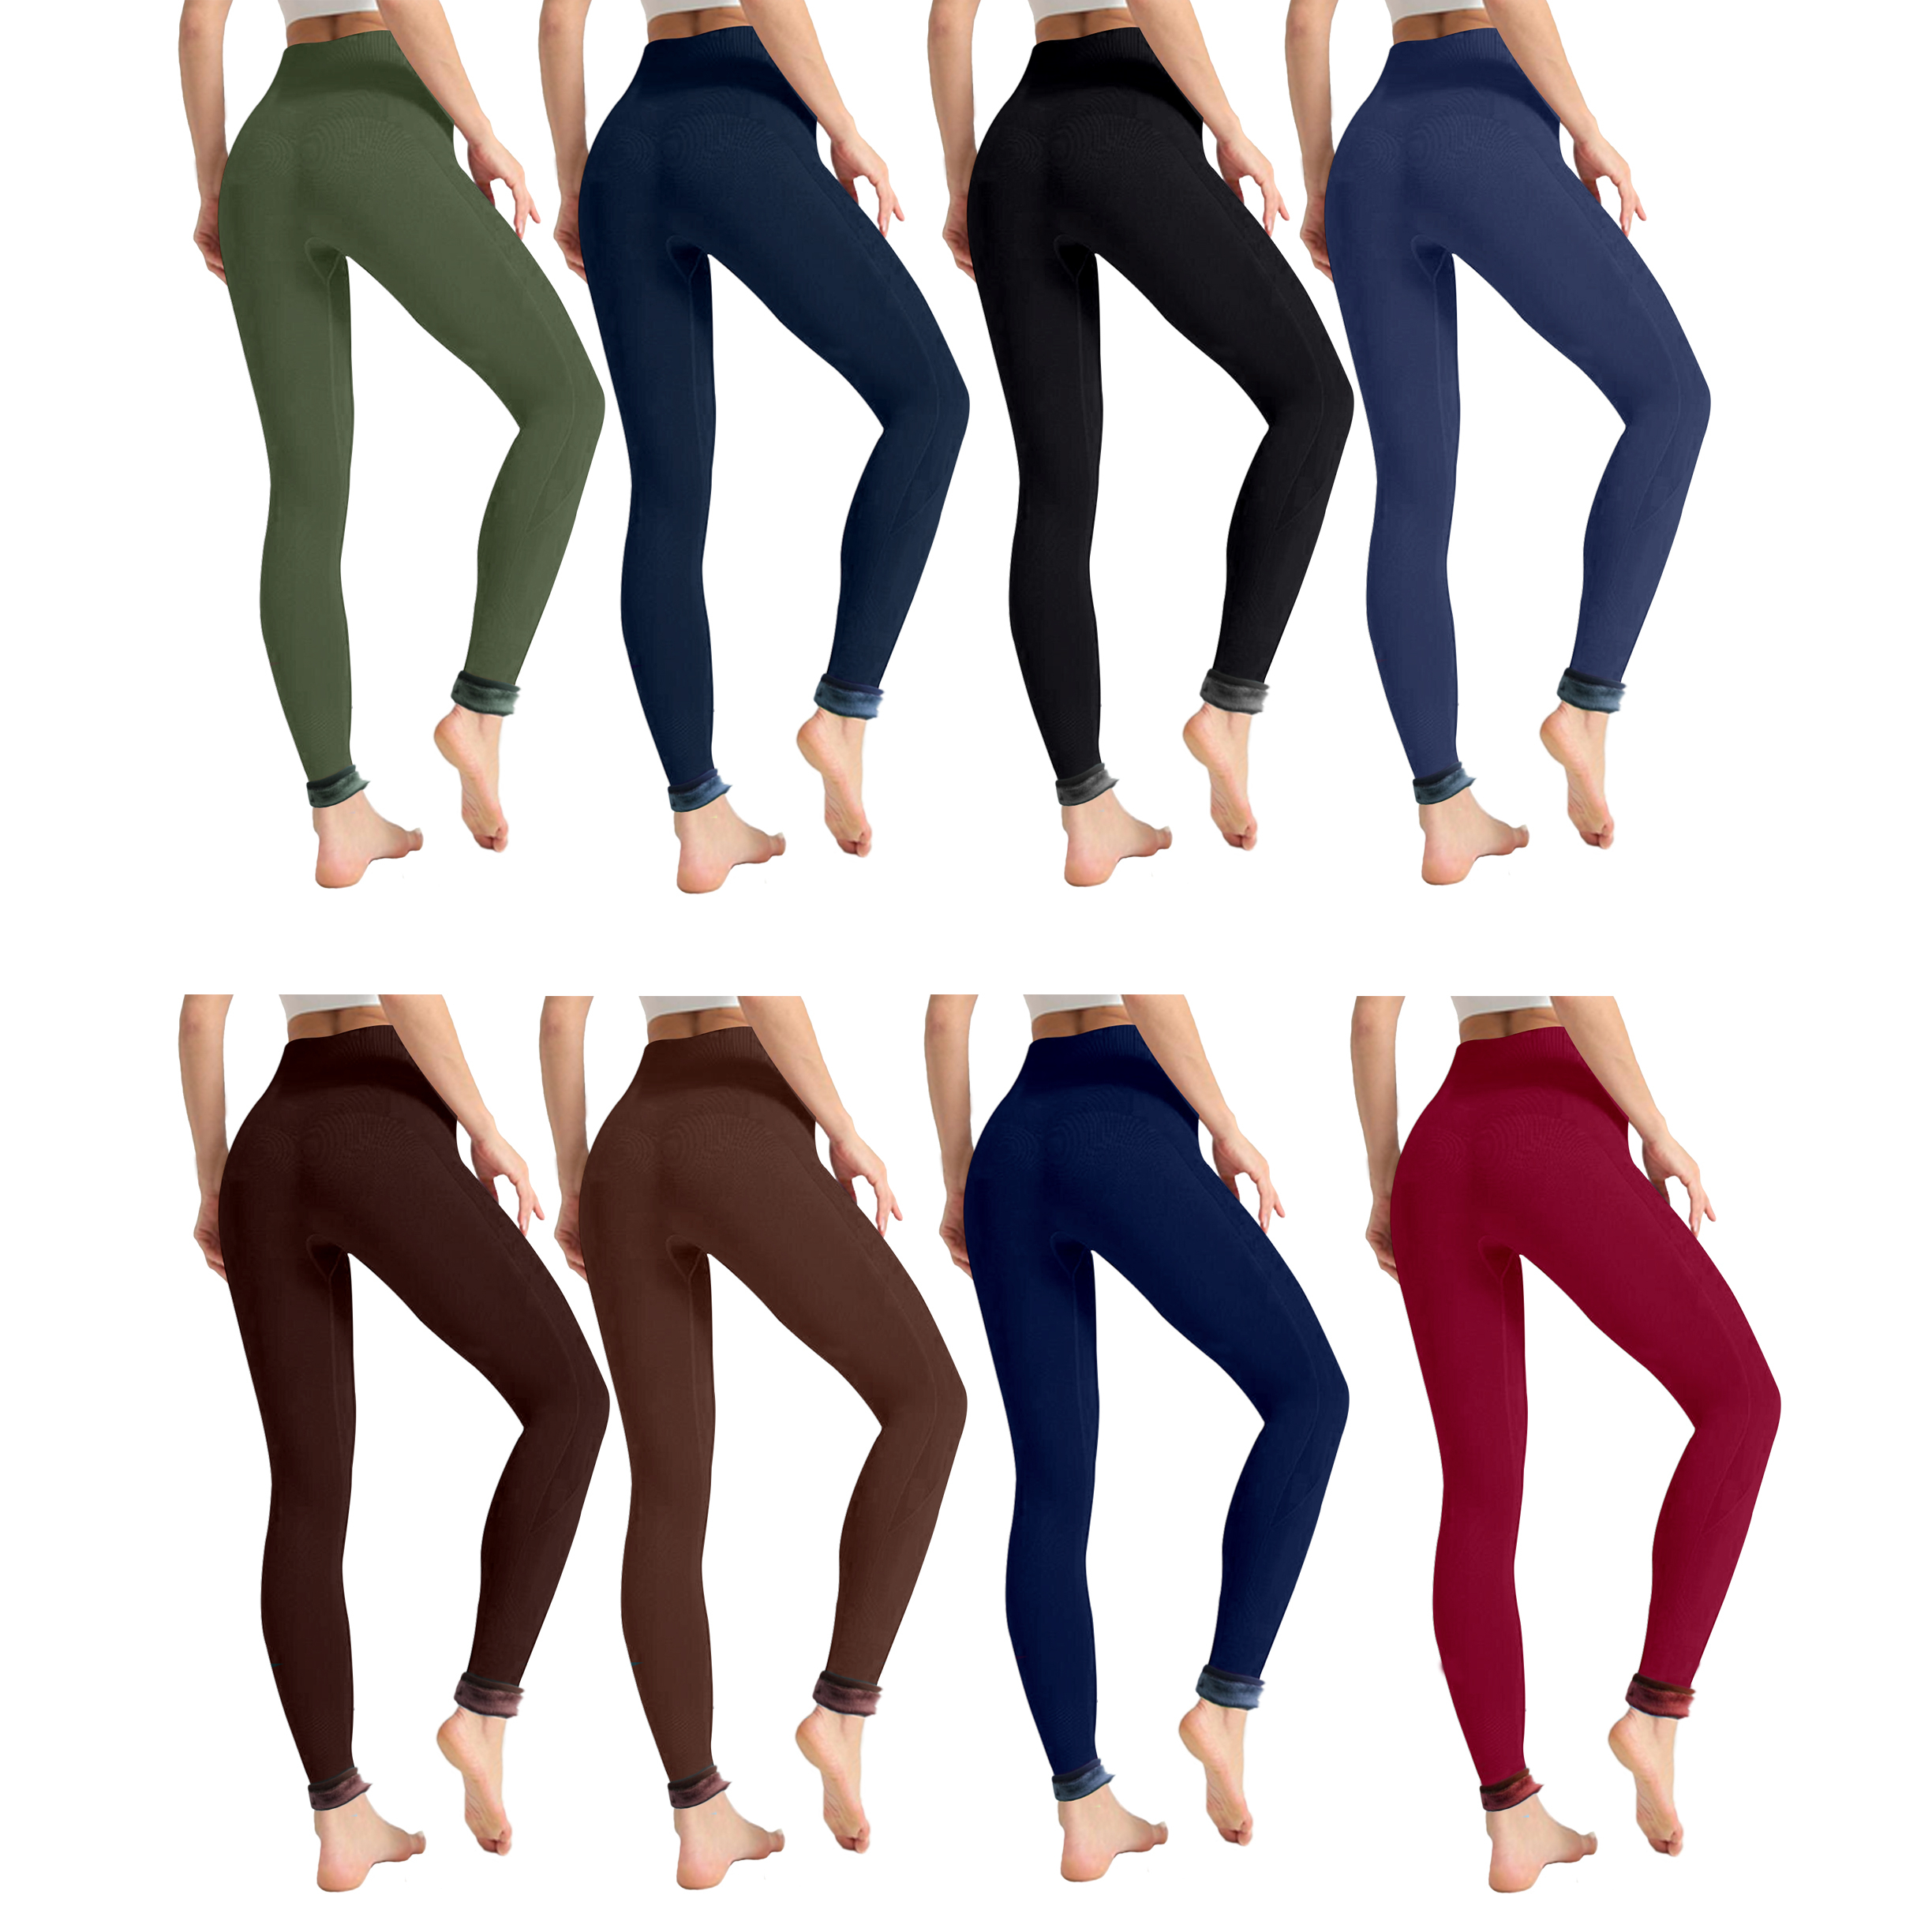 3-Pack: Women's Winter Warm Thick Fur Lined Thermal Leggings - Assorted, Small/Medium